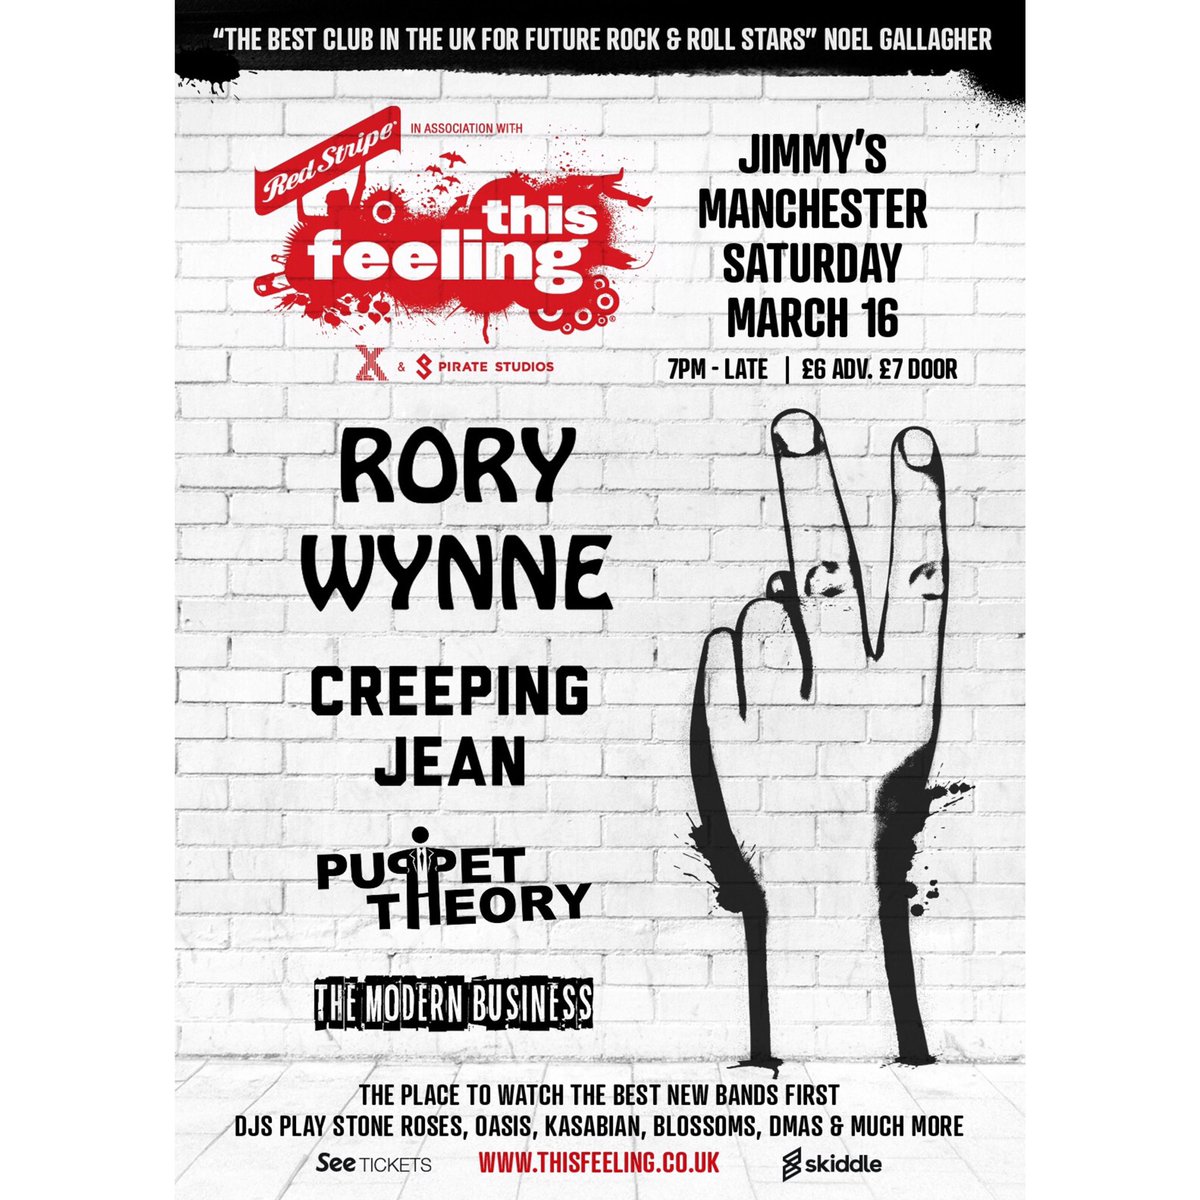 Less than a week until our first gig with @This_Feeling at JIMMYS NQ. Tickets still available from the link in our bio or message us for physicals👀massive gig for us this so dont miss out x